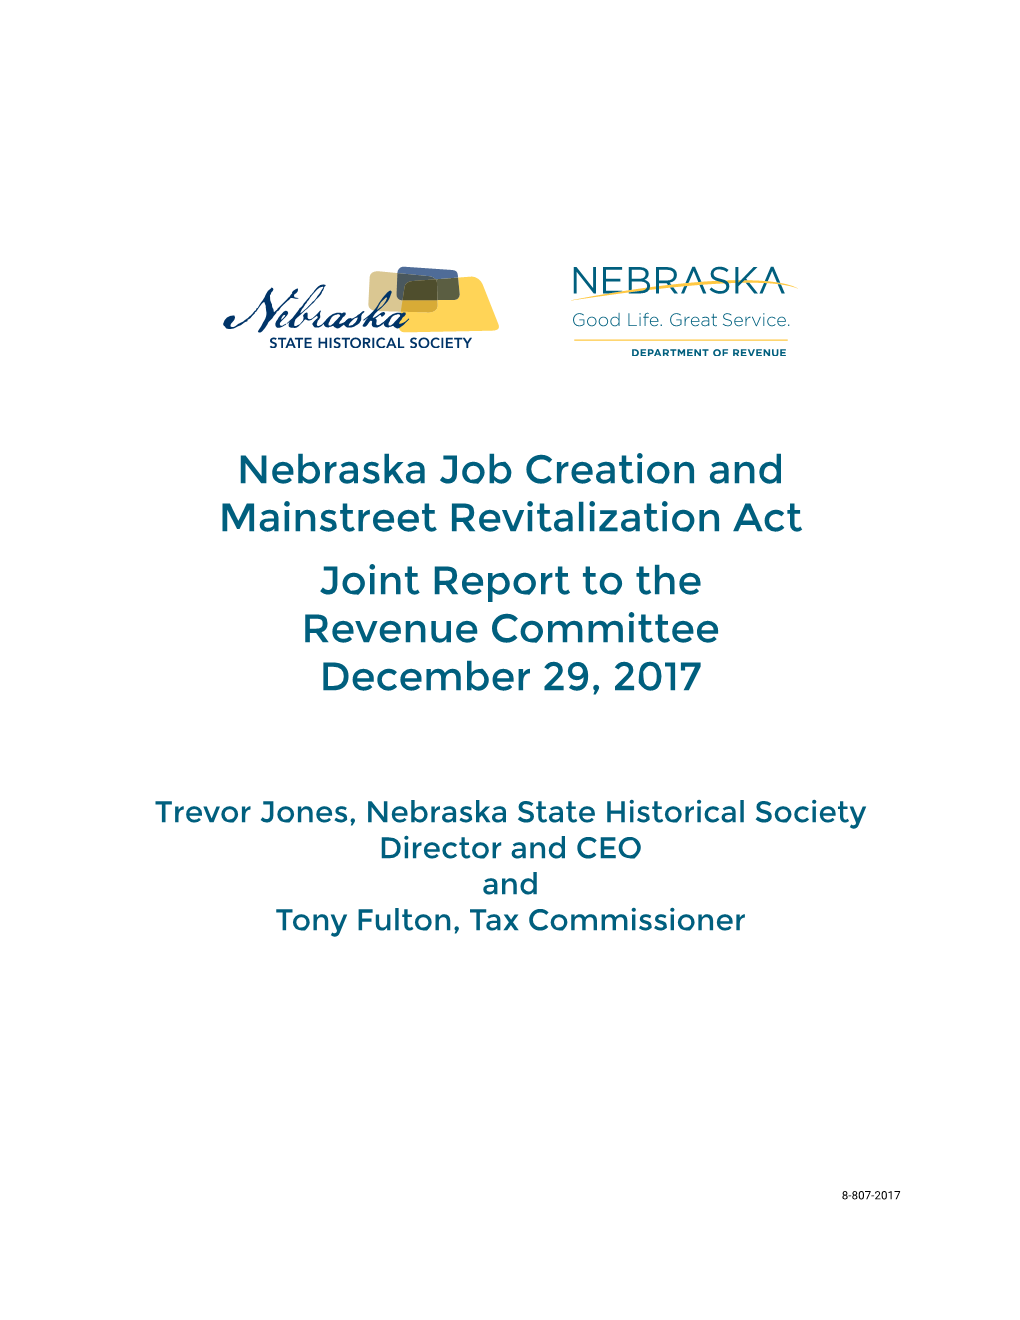 Nebraska Job Creation and Mainstreet Revitalization Act Joint Report to the Revenue Committee December 29, 2017